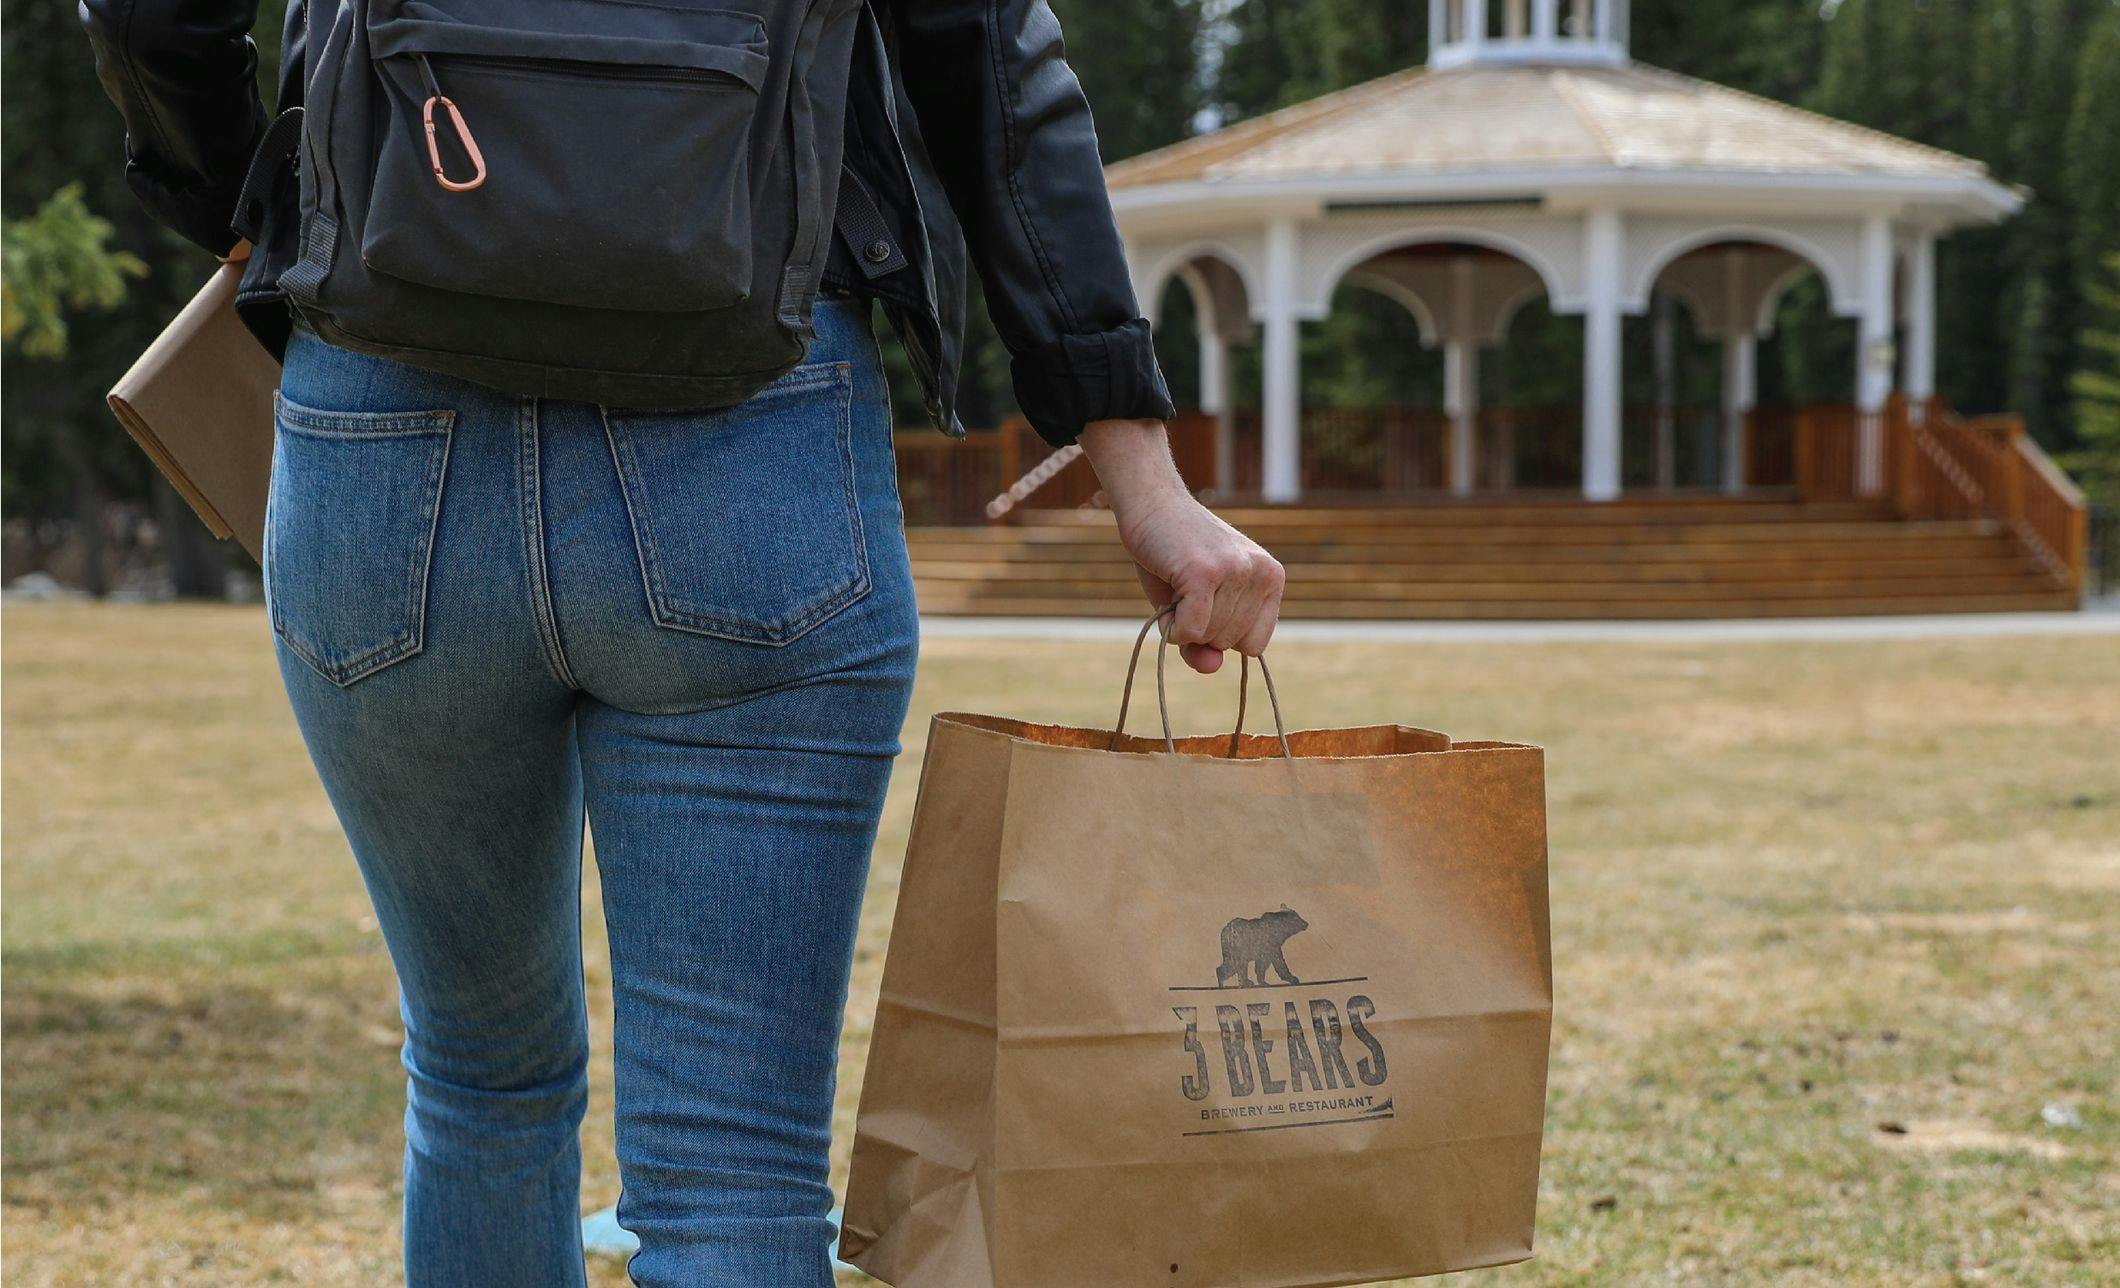 Arriving to Central Park with a Three Bears Brewery and Restaurant takeout bag